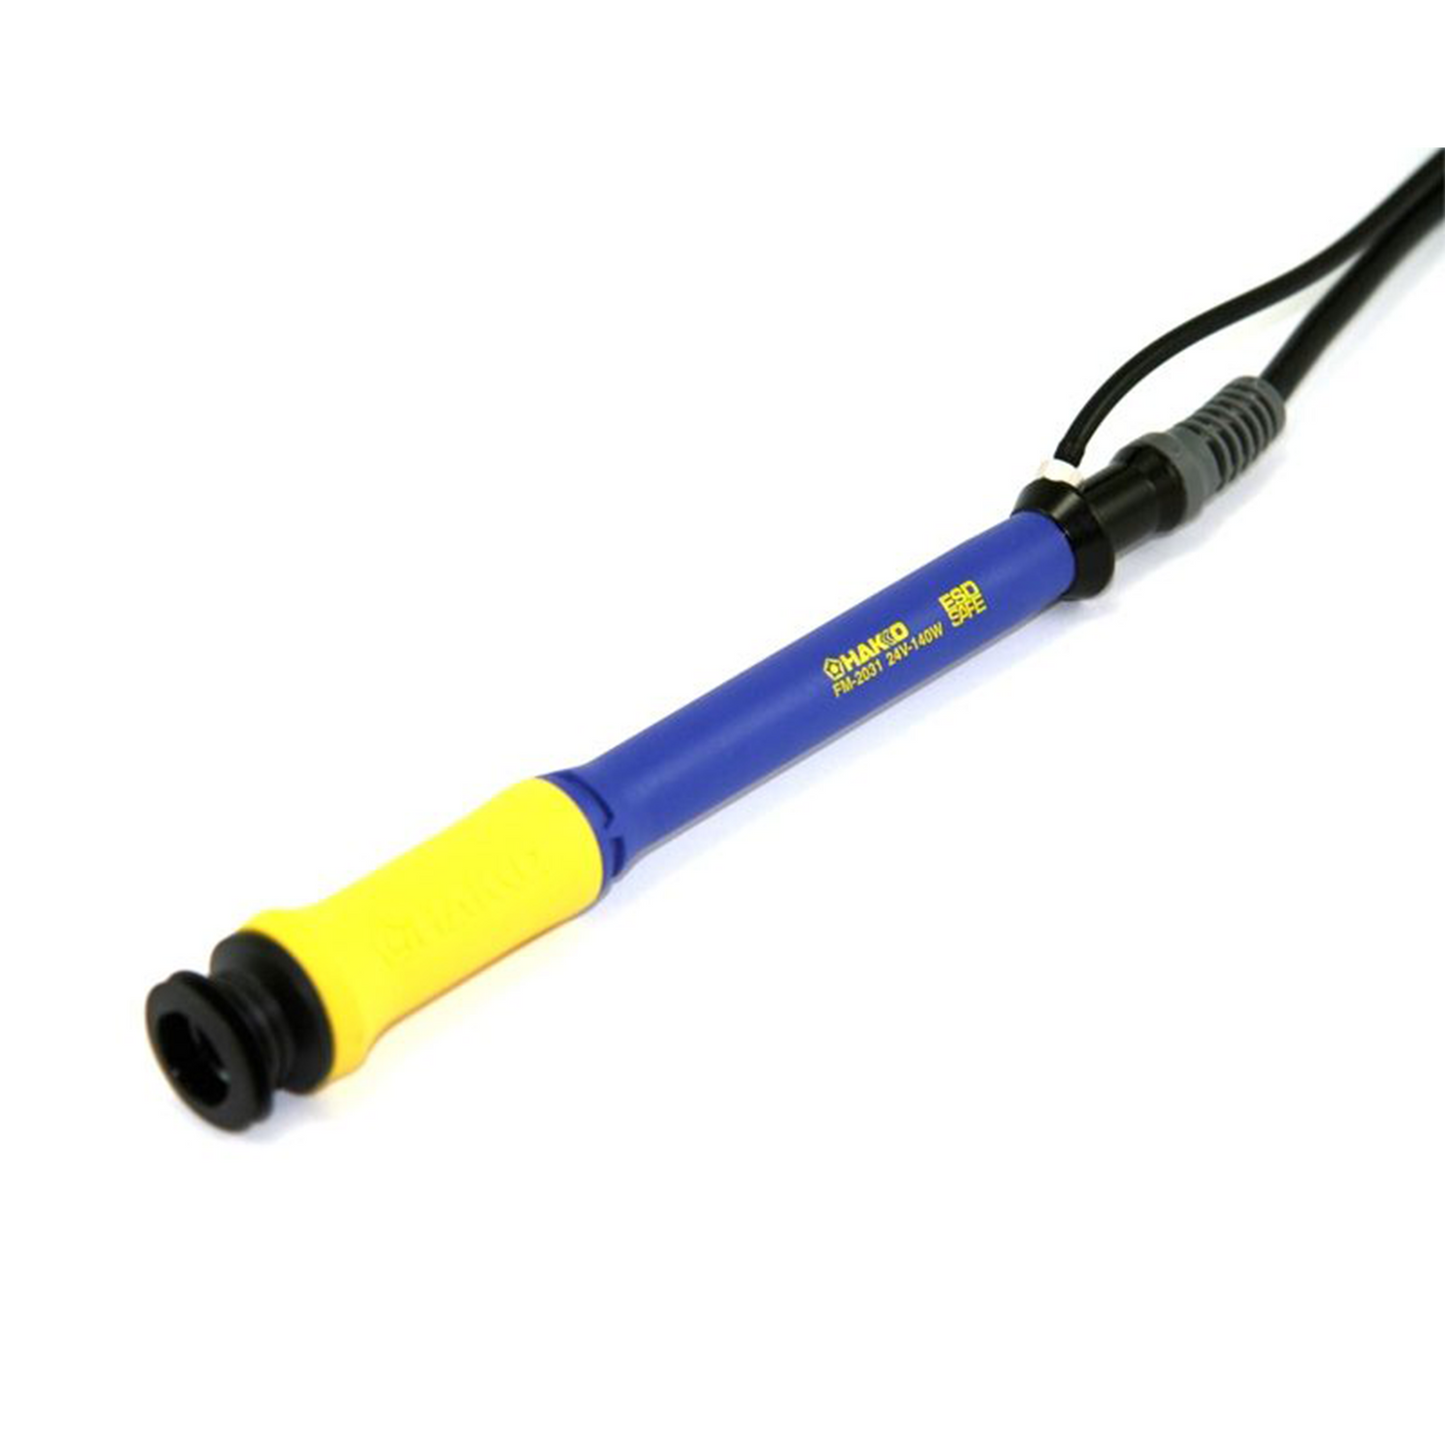 Hakko Soldering iron FM2031 handpiece only for soldering station through hole manual soldering on PCB board